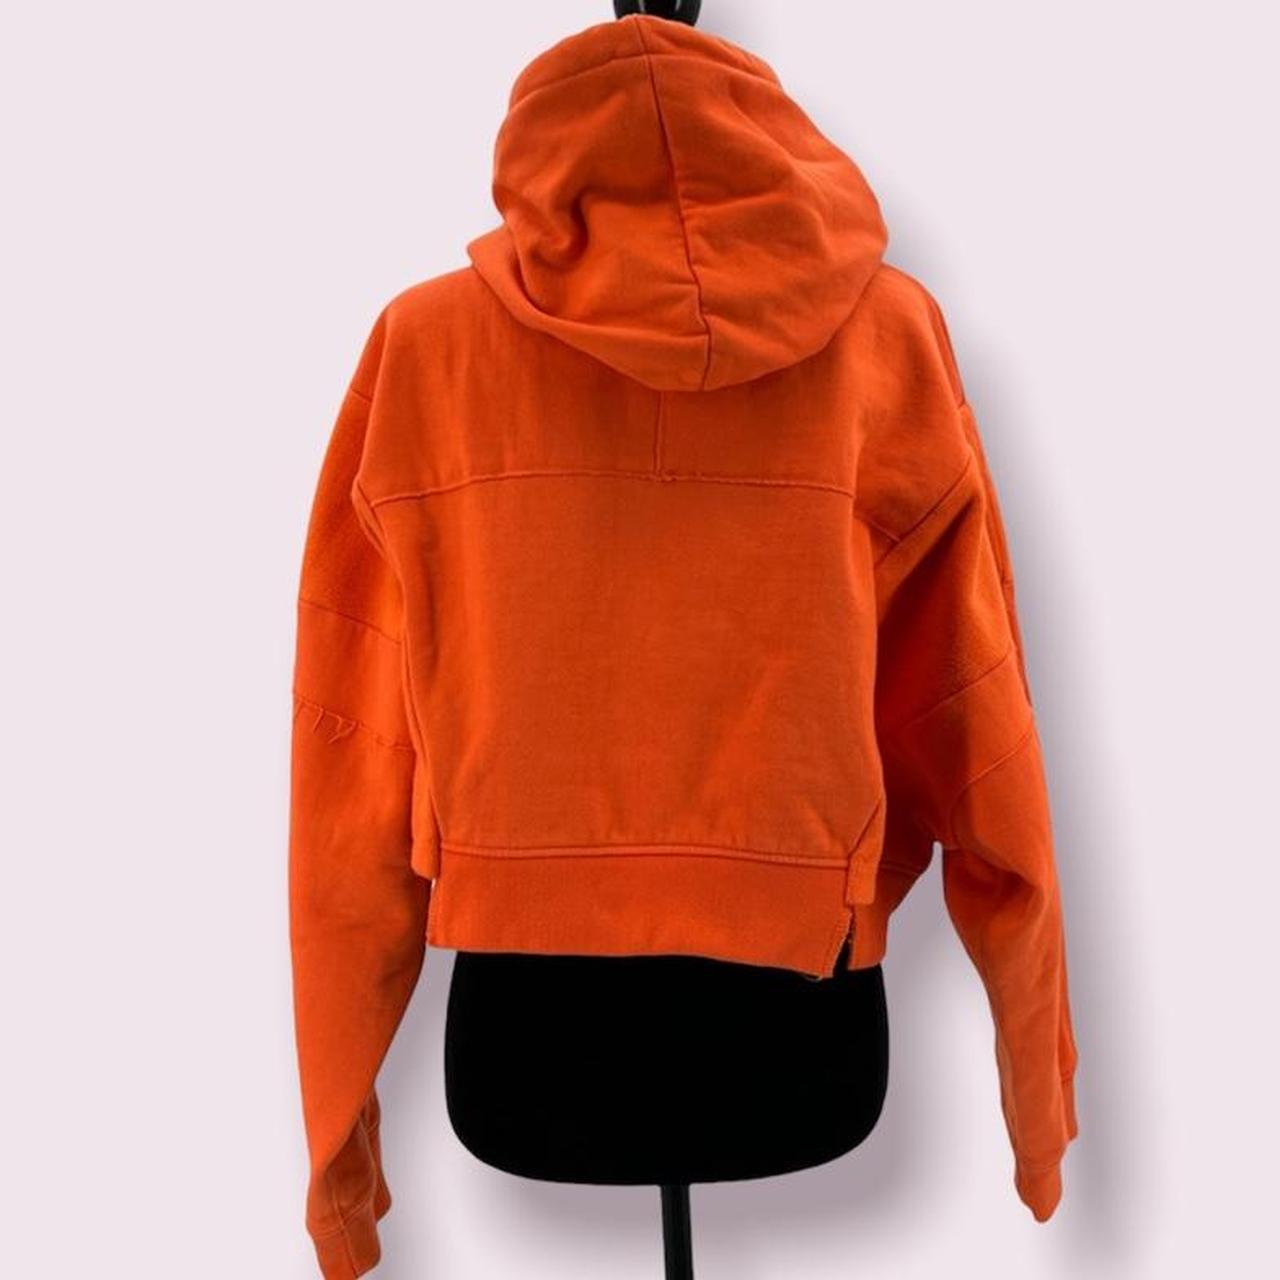 Product Image 3 - PARASUCO Orange cropped hoddie🧡
Excellent preowned